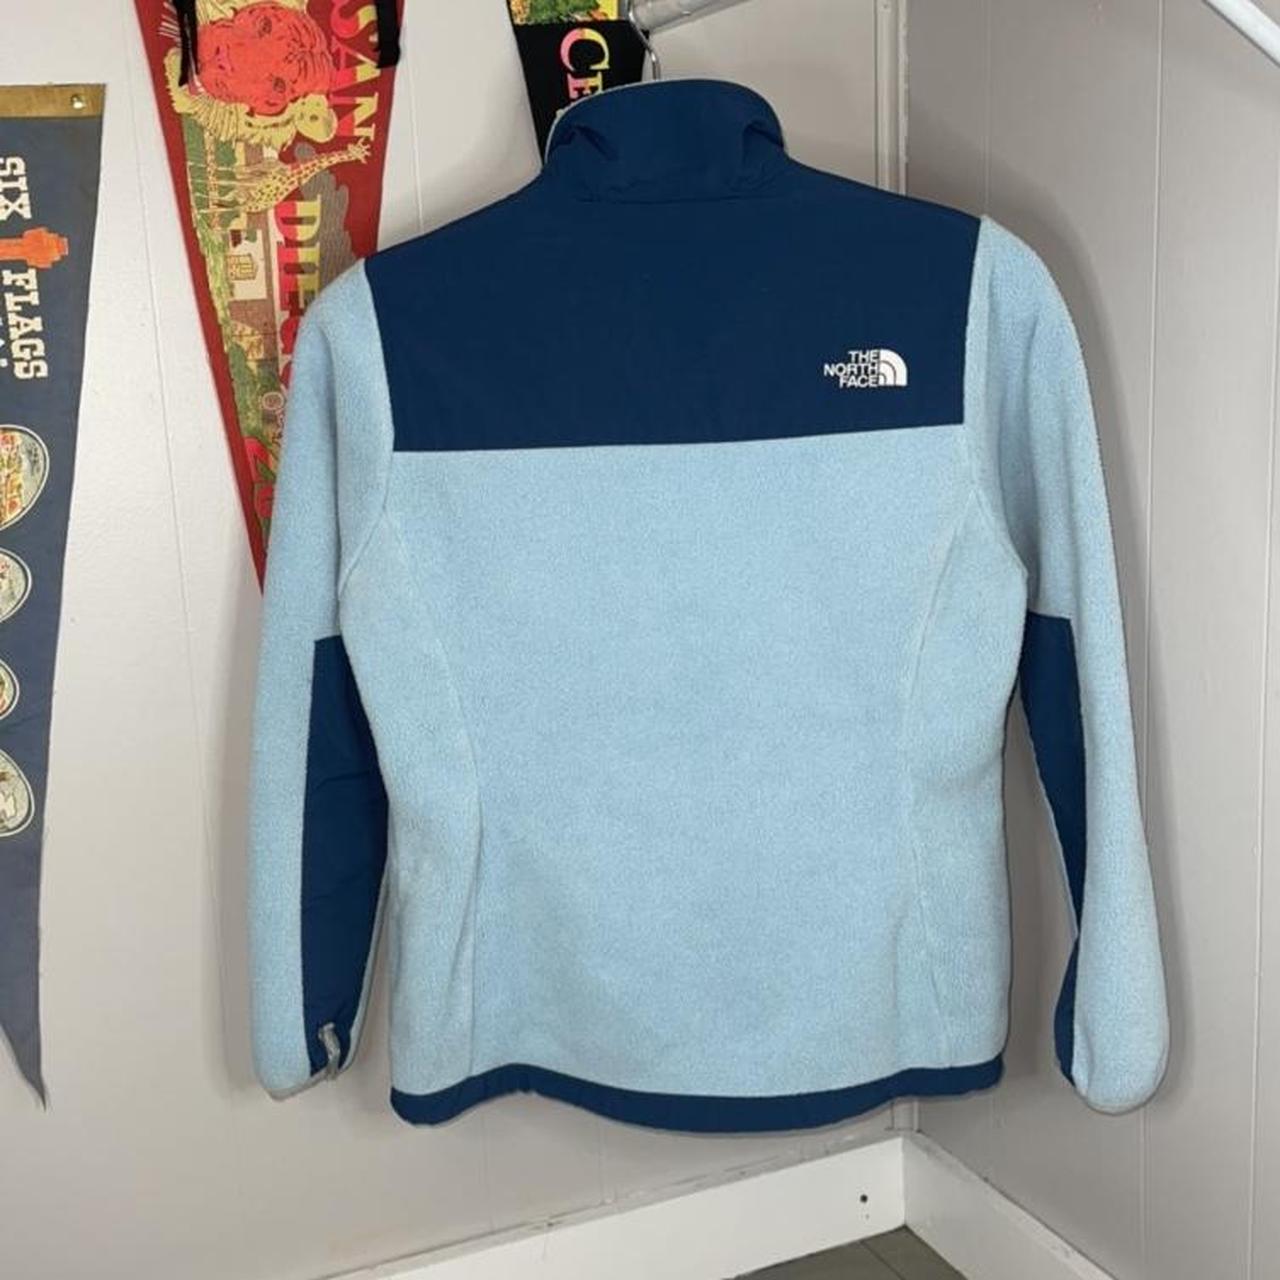 Product Image 2 - The North Face Denali Fleece